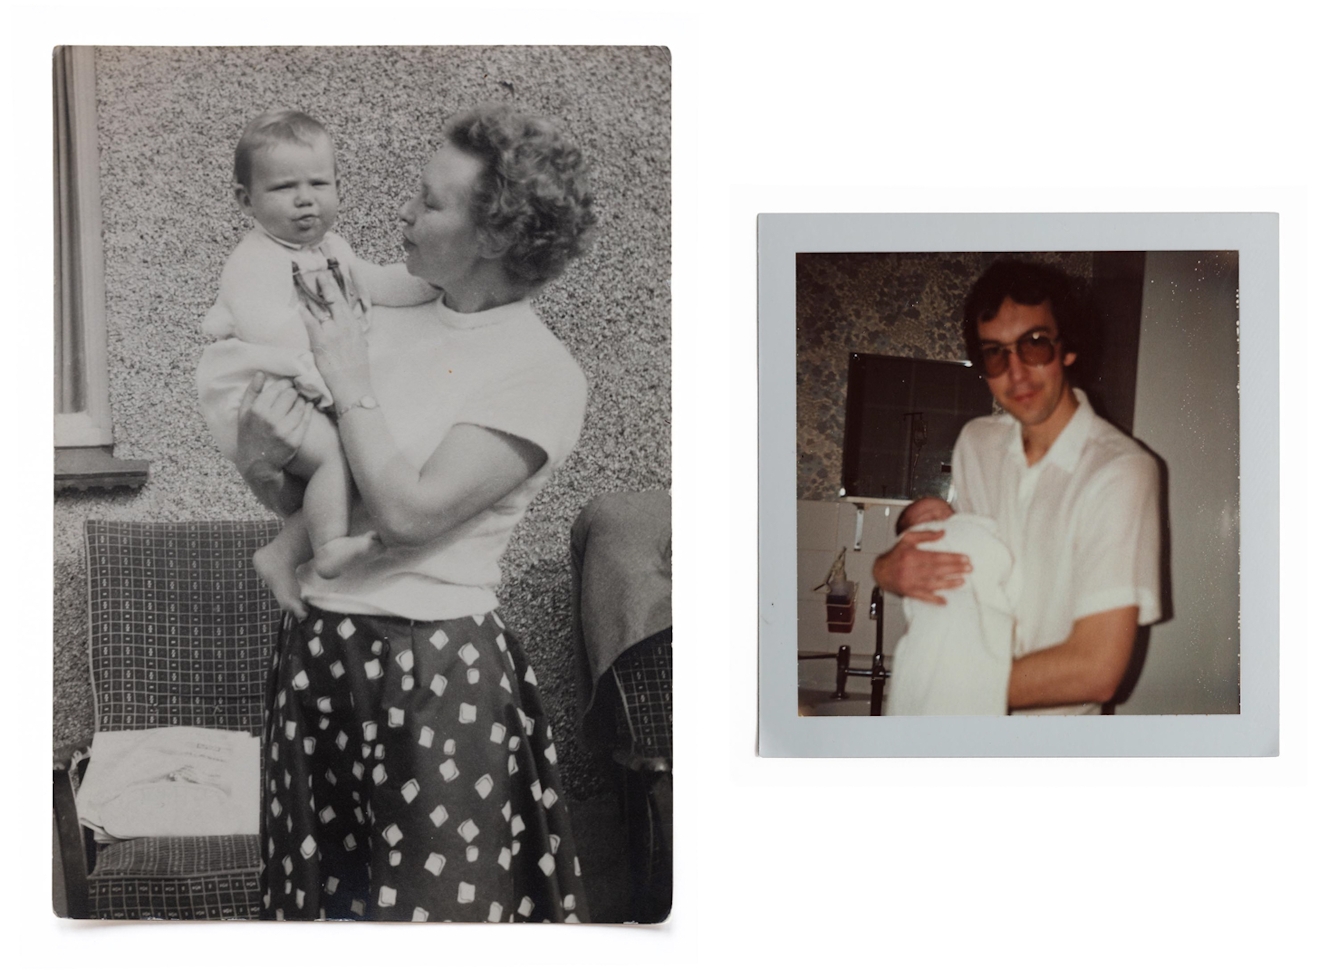 A group of 2 family archive photos ranging in date from 1956 to 1986. The photos show young babies in the arms of their parents, all different generations but very similar poses and expressions.